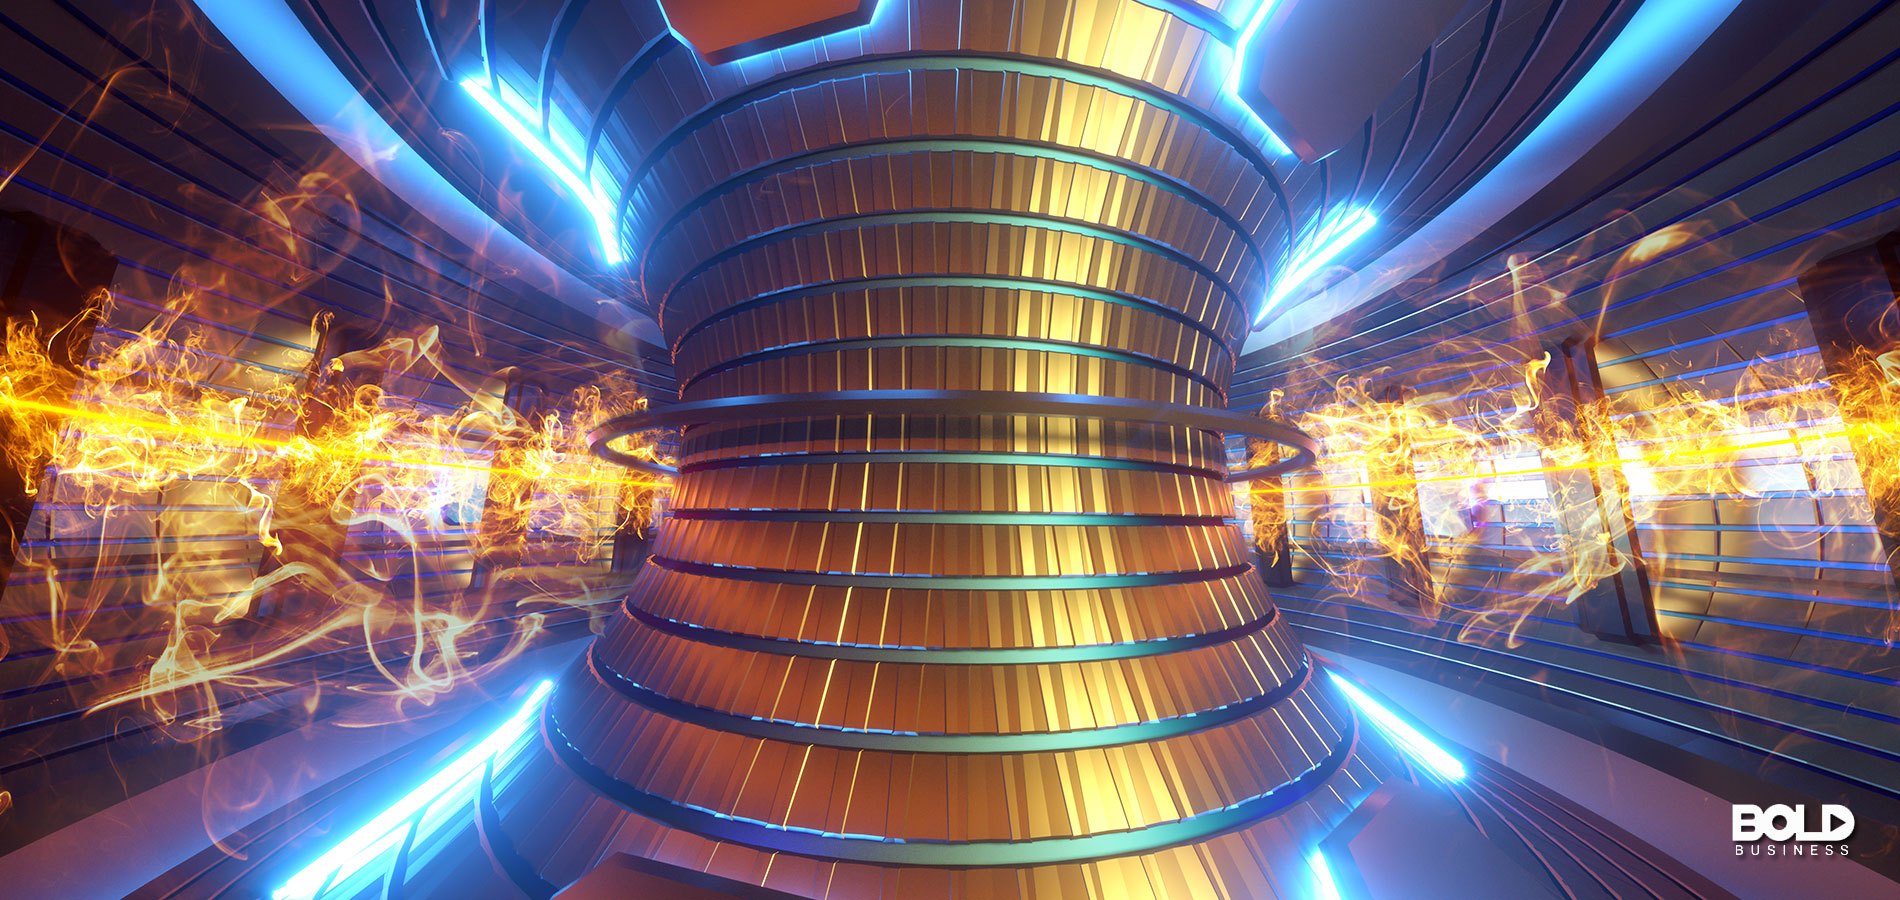 The inside of a nuclear reactor is hot